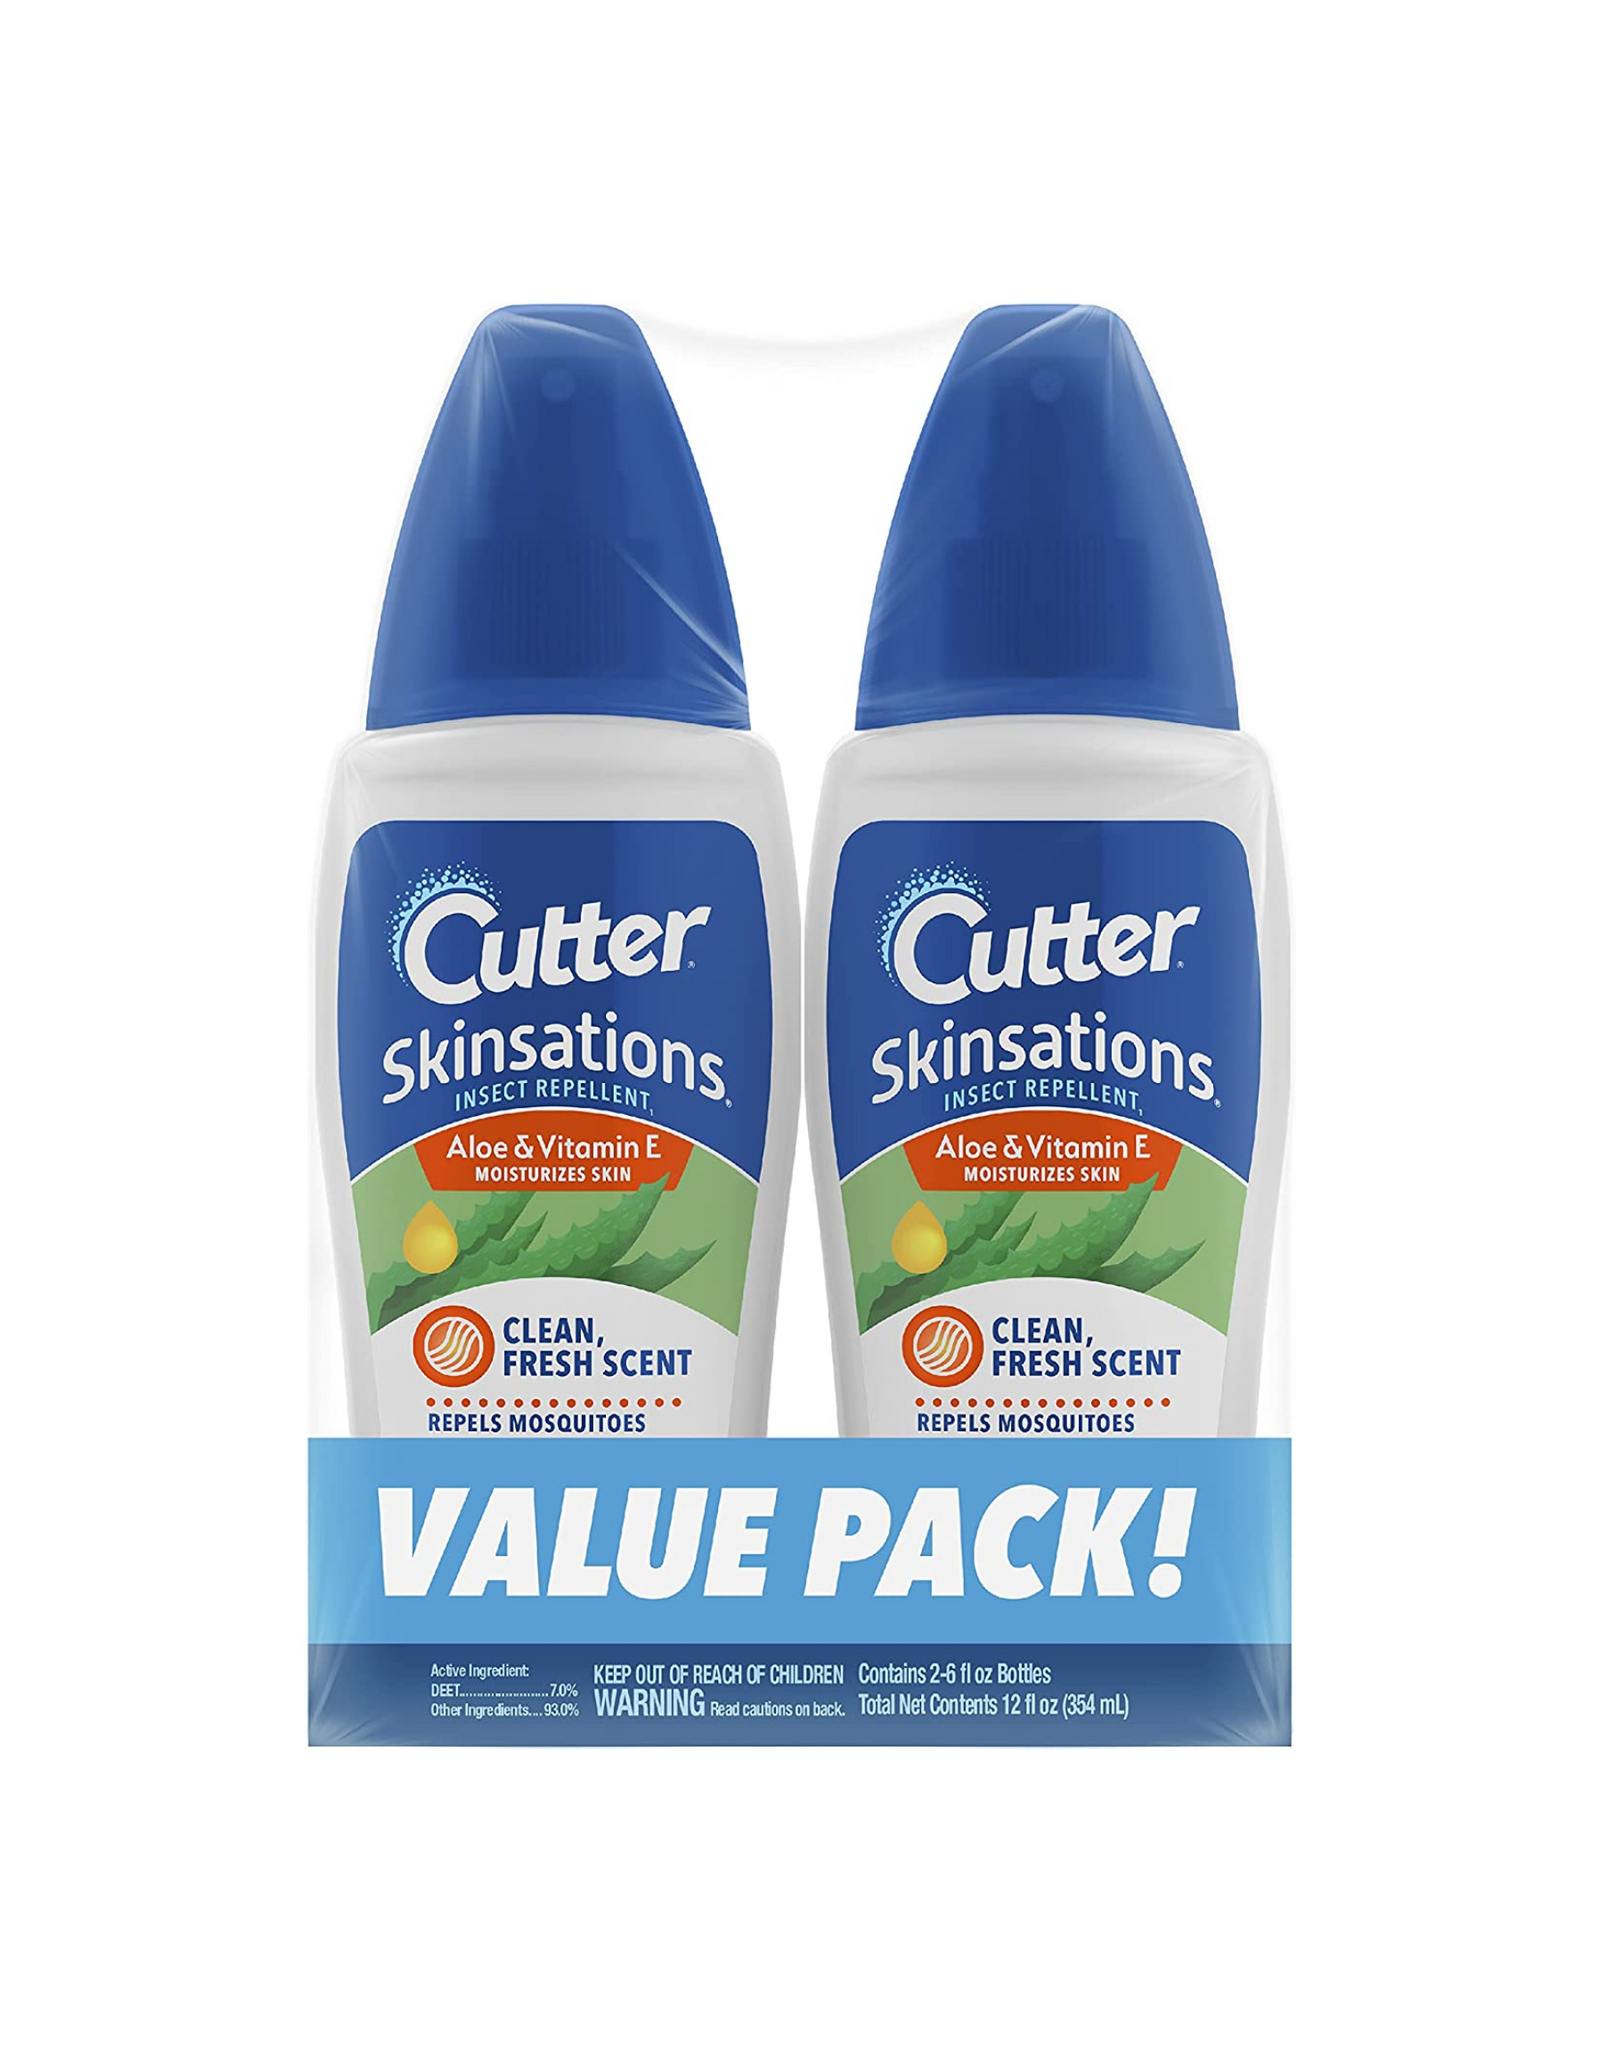 Cutter Skinsations Insect Repellent with Aloe & Vitamin E, 6 oz, Twin pack